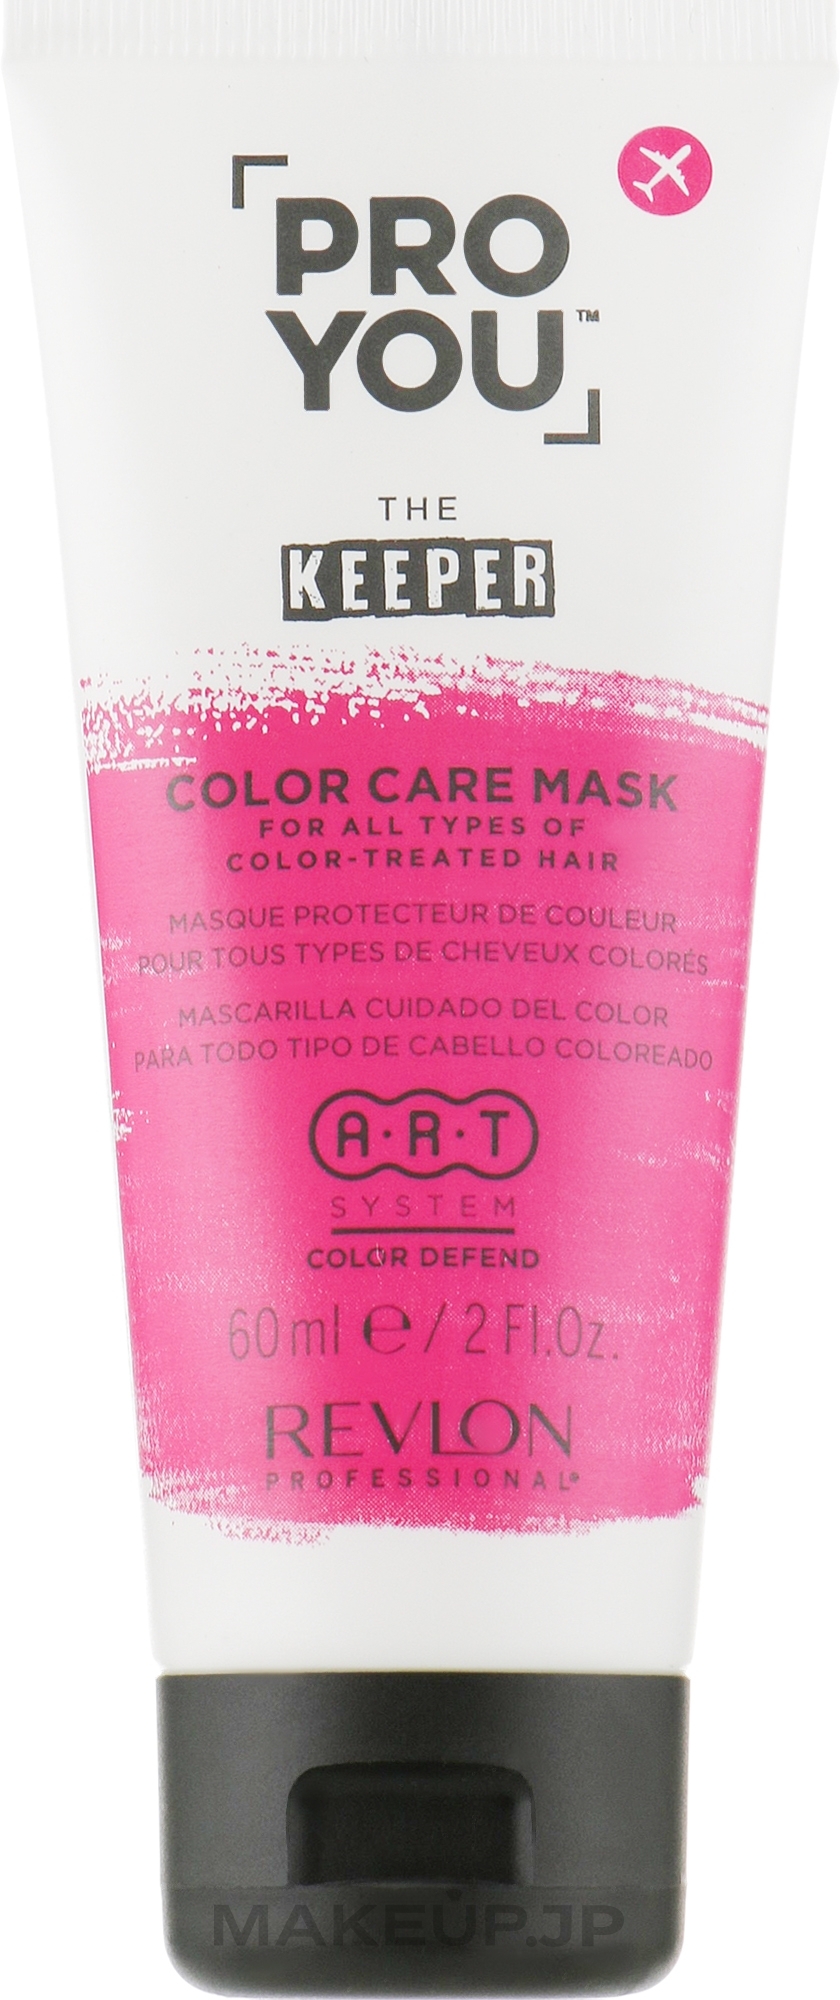 Colored Hair Mask - Revlon Professional Pro You Keeper Color Care Mask — photo 60 ml